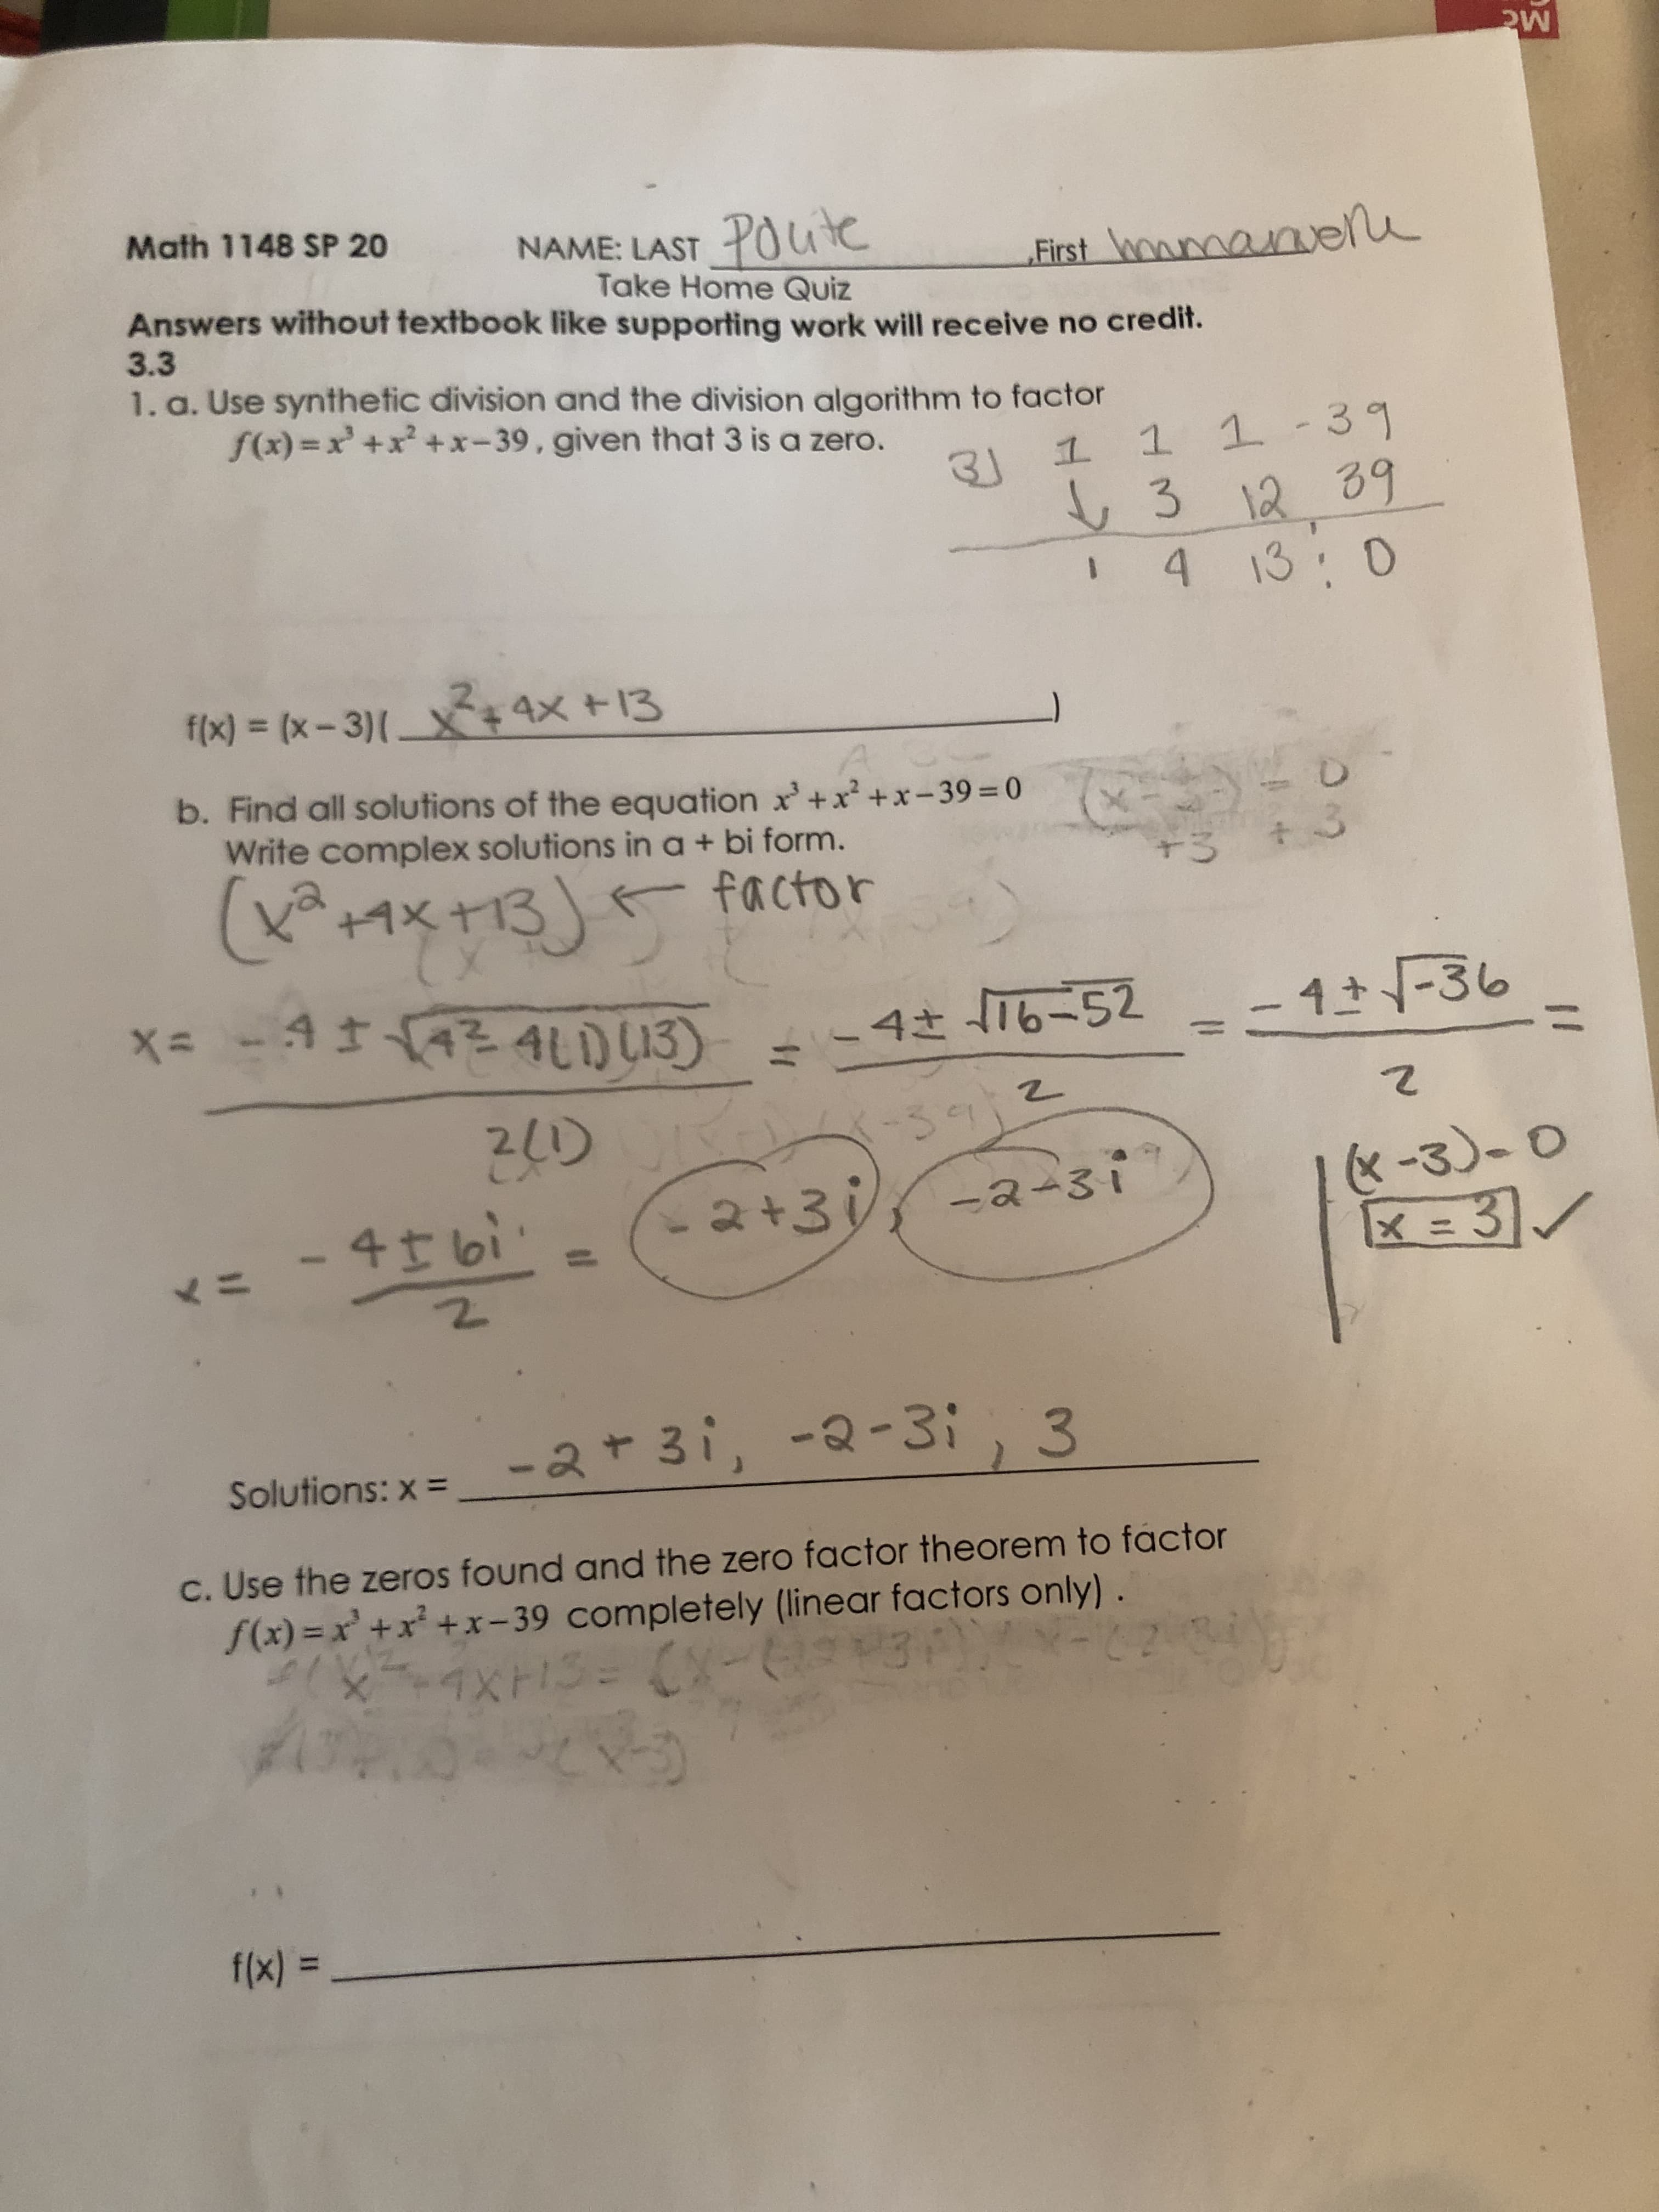 Mc
Math 1148 SP 20
NAME: LAST POite
Take Home Quiz
Answers without textbook like supporting work will receive no credit.
First wowmanvene
3.3
1. a. Use synthetic division and the division algorithm to factor
f(x) =x +x +x-39, given that 3 is a zero.
3J 1 1 1-39
3 12 39
4 13:0
f(x) = (x - 3)[ X+4X +13
b. Find all solutions of the equation x'+x² +x-39=0
Write complex solutions in a+ bi form.
+3
(+イ×+13) factor
K玉×t13
x= -4142 4LD13)
-4 T6-52
4-36
4さ
21)
-30
&-3)-0
31
4I bi'
-2+3 -2-3i
<ニ
-2+3i, -2-3;, 3
Solutions: x =
c. Use the zeros found and the zero factor theorem to factor
S(x) = x' +x² +x- 39 completely (linear factors only)
f(x) =
